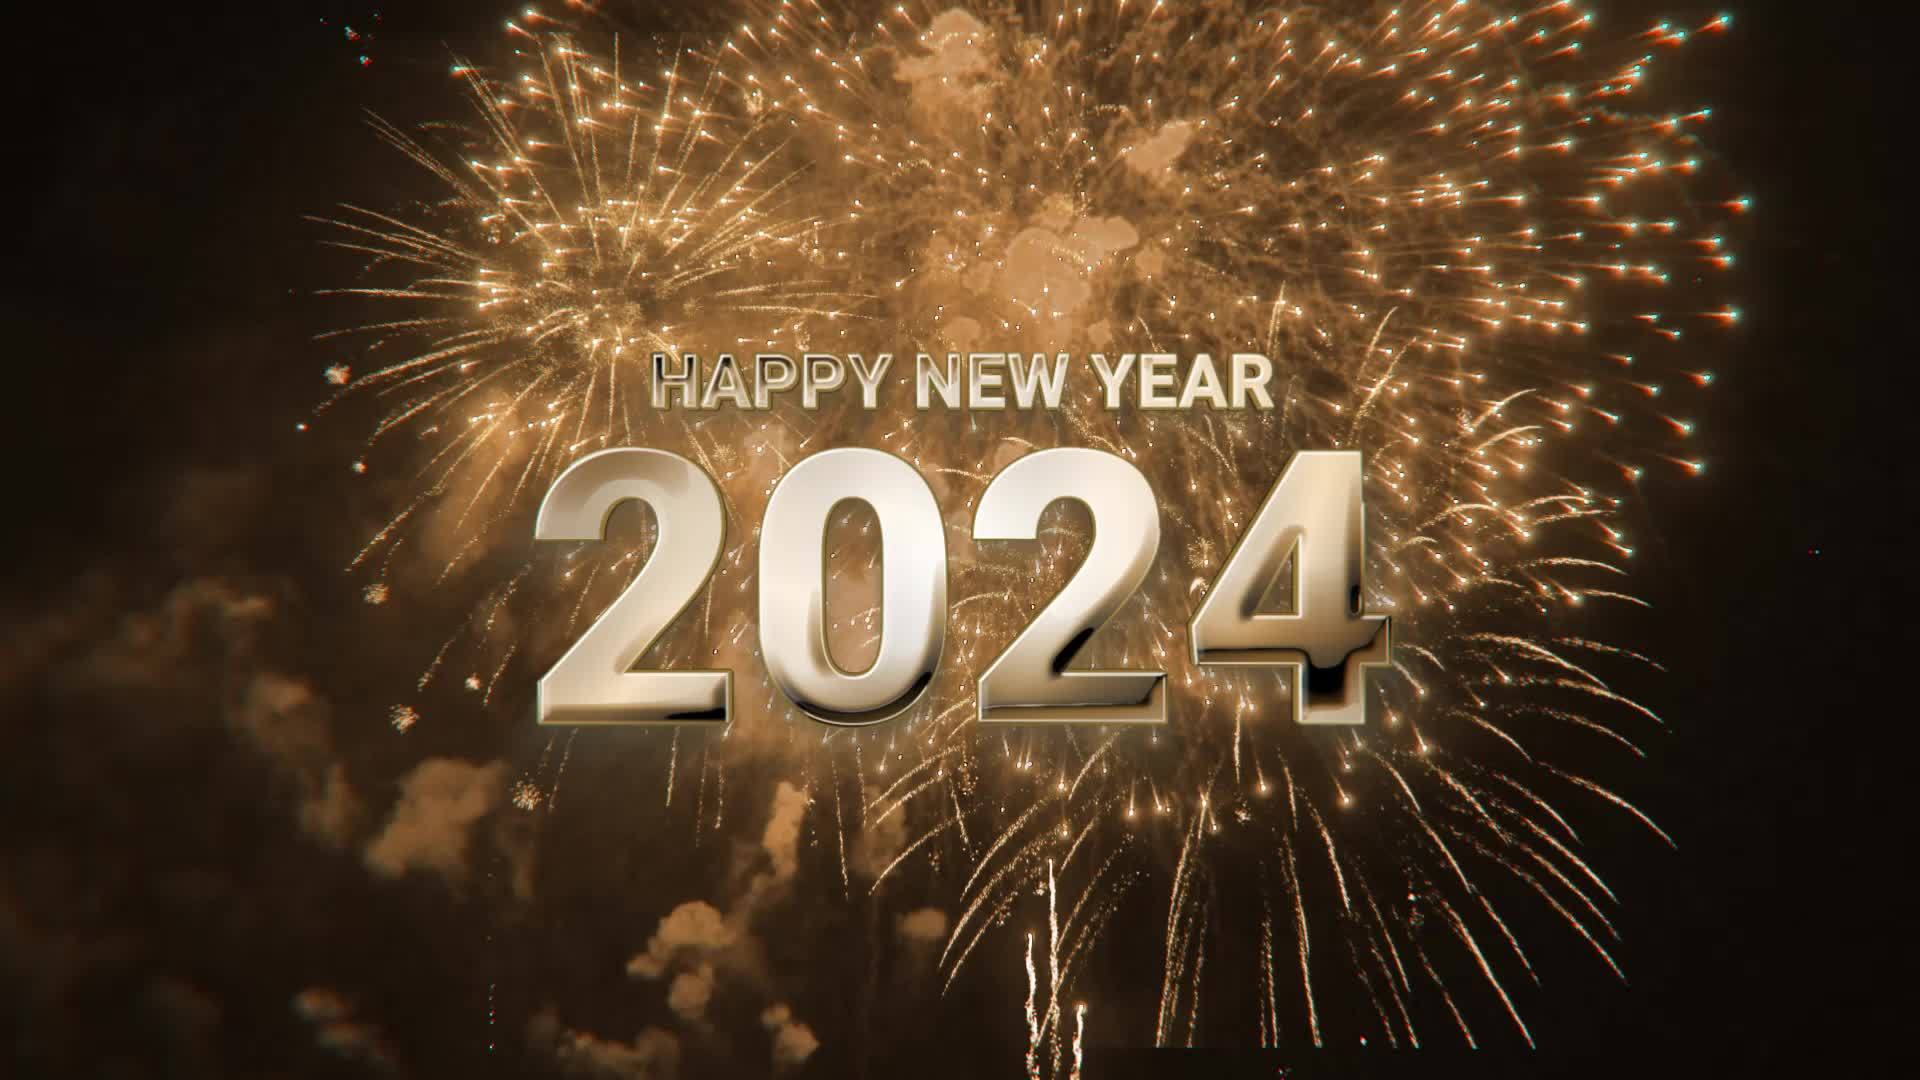 Happy New Year Wishes 2024 | Happy New Year Messages 2023